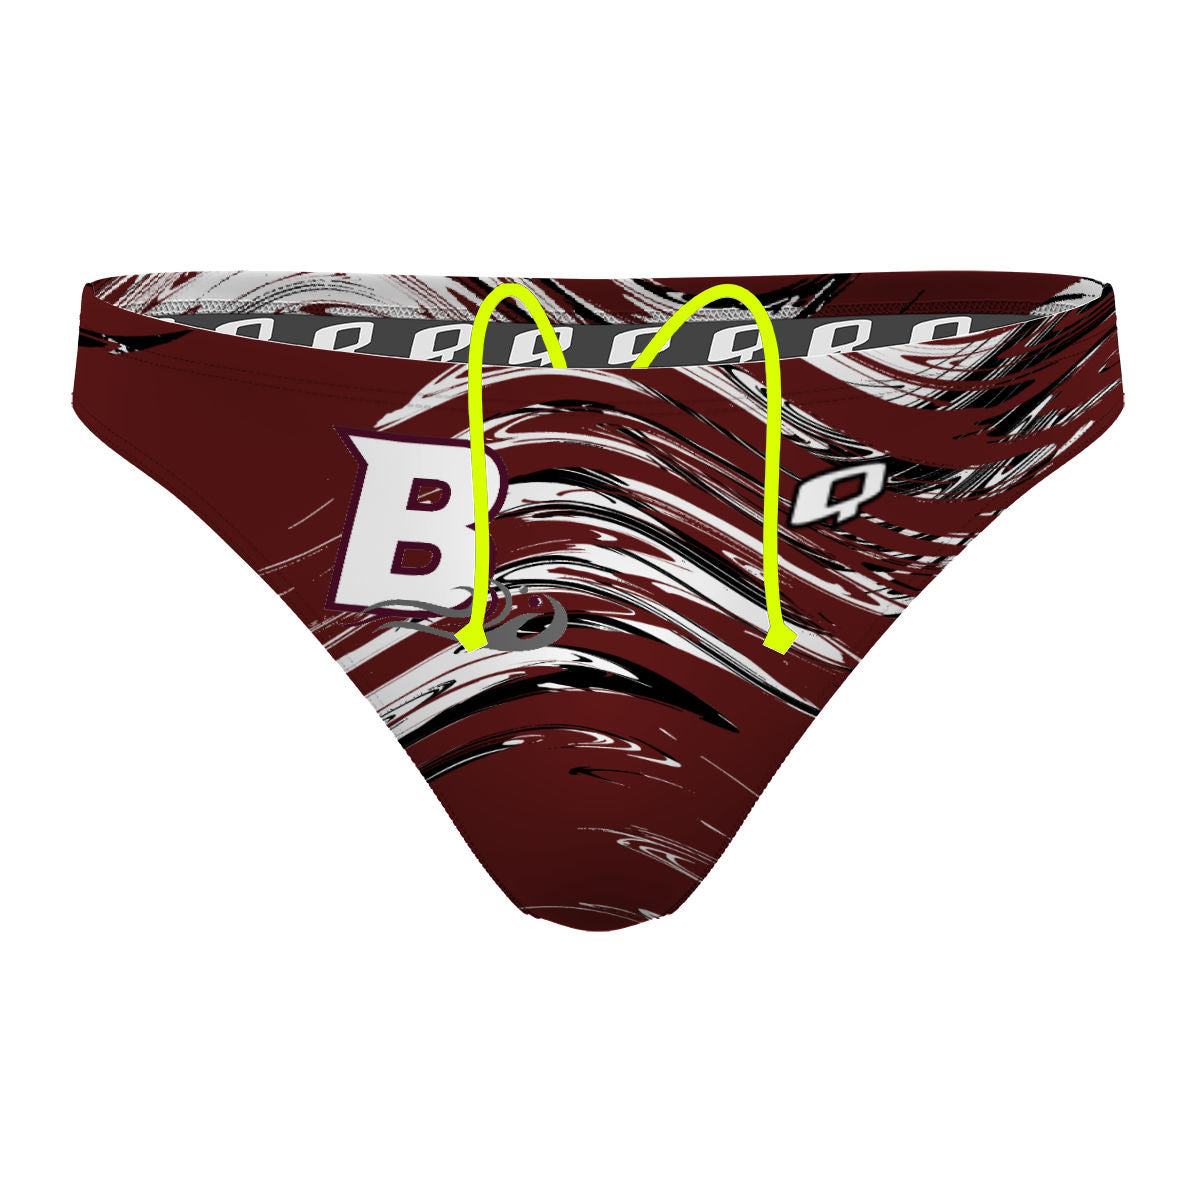 Buhler High School - Waterpolo Brief Swimsuit